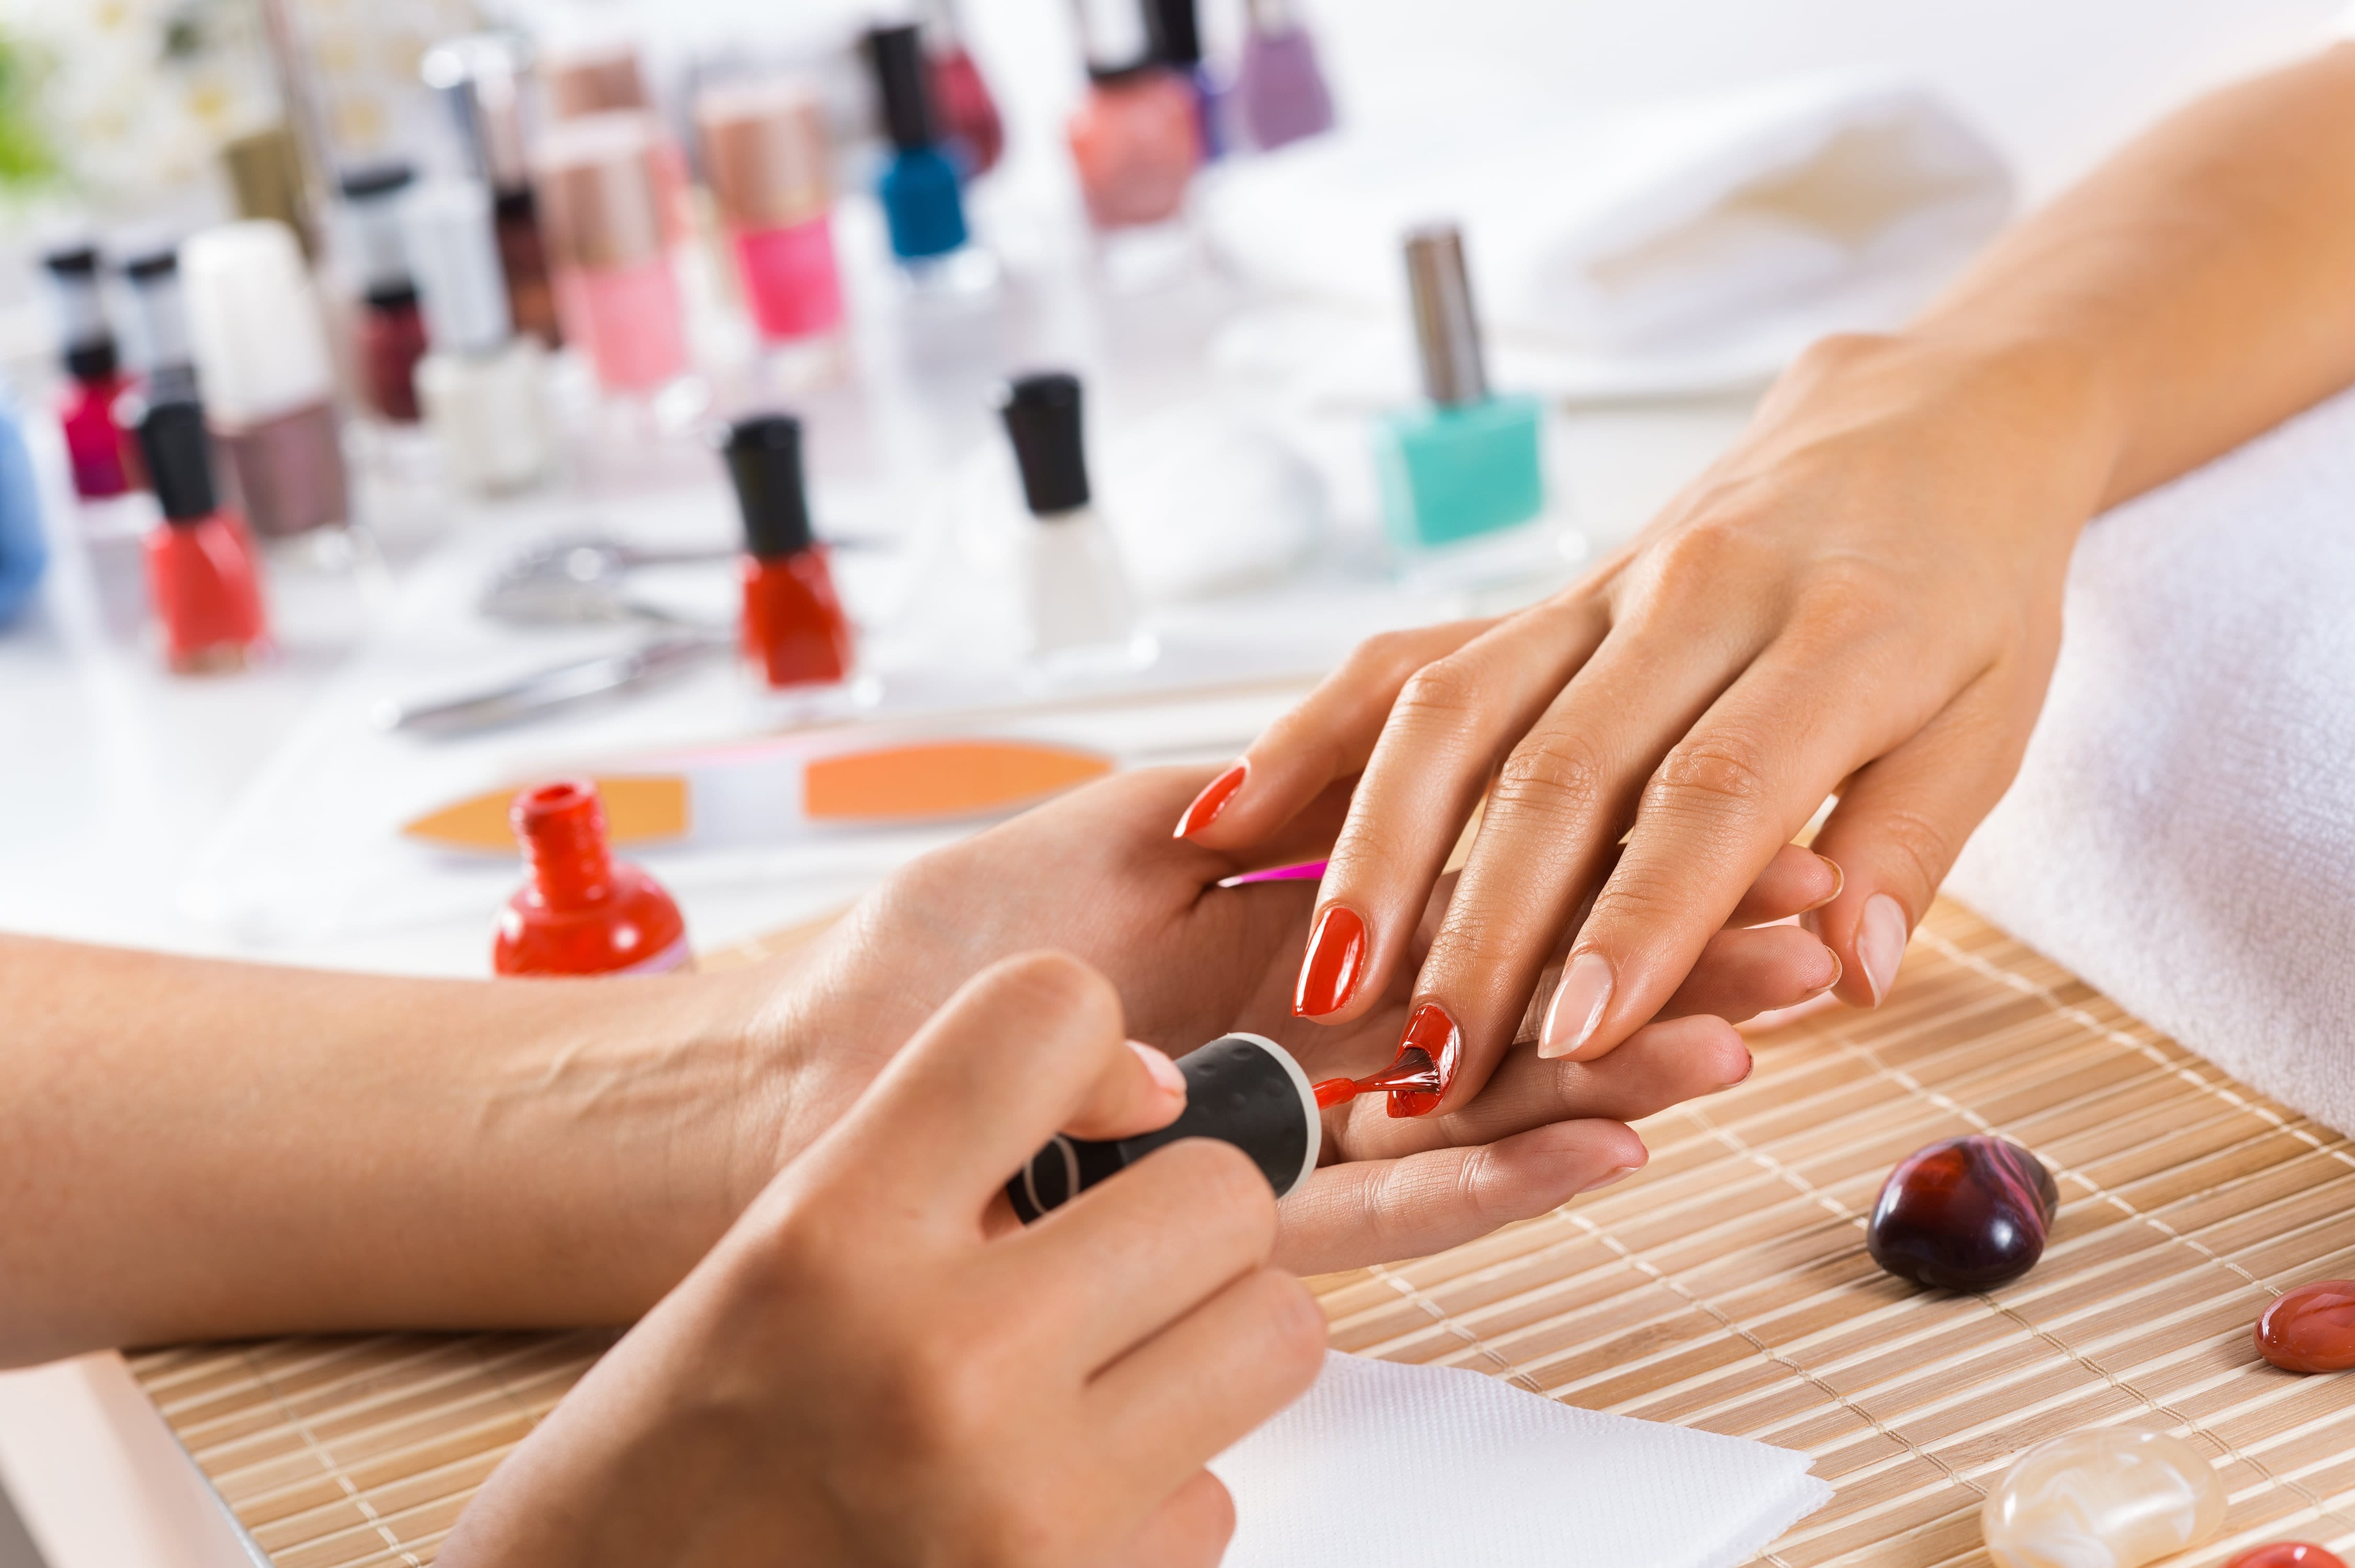 How To Store Nail Polish: 6 Do's and Don'ts